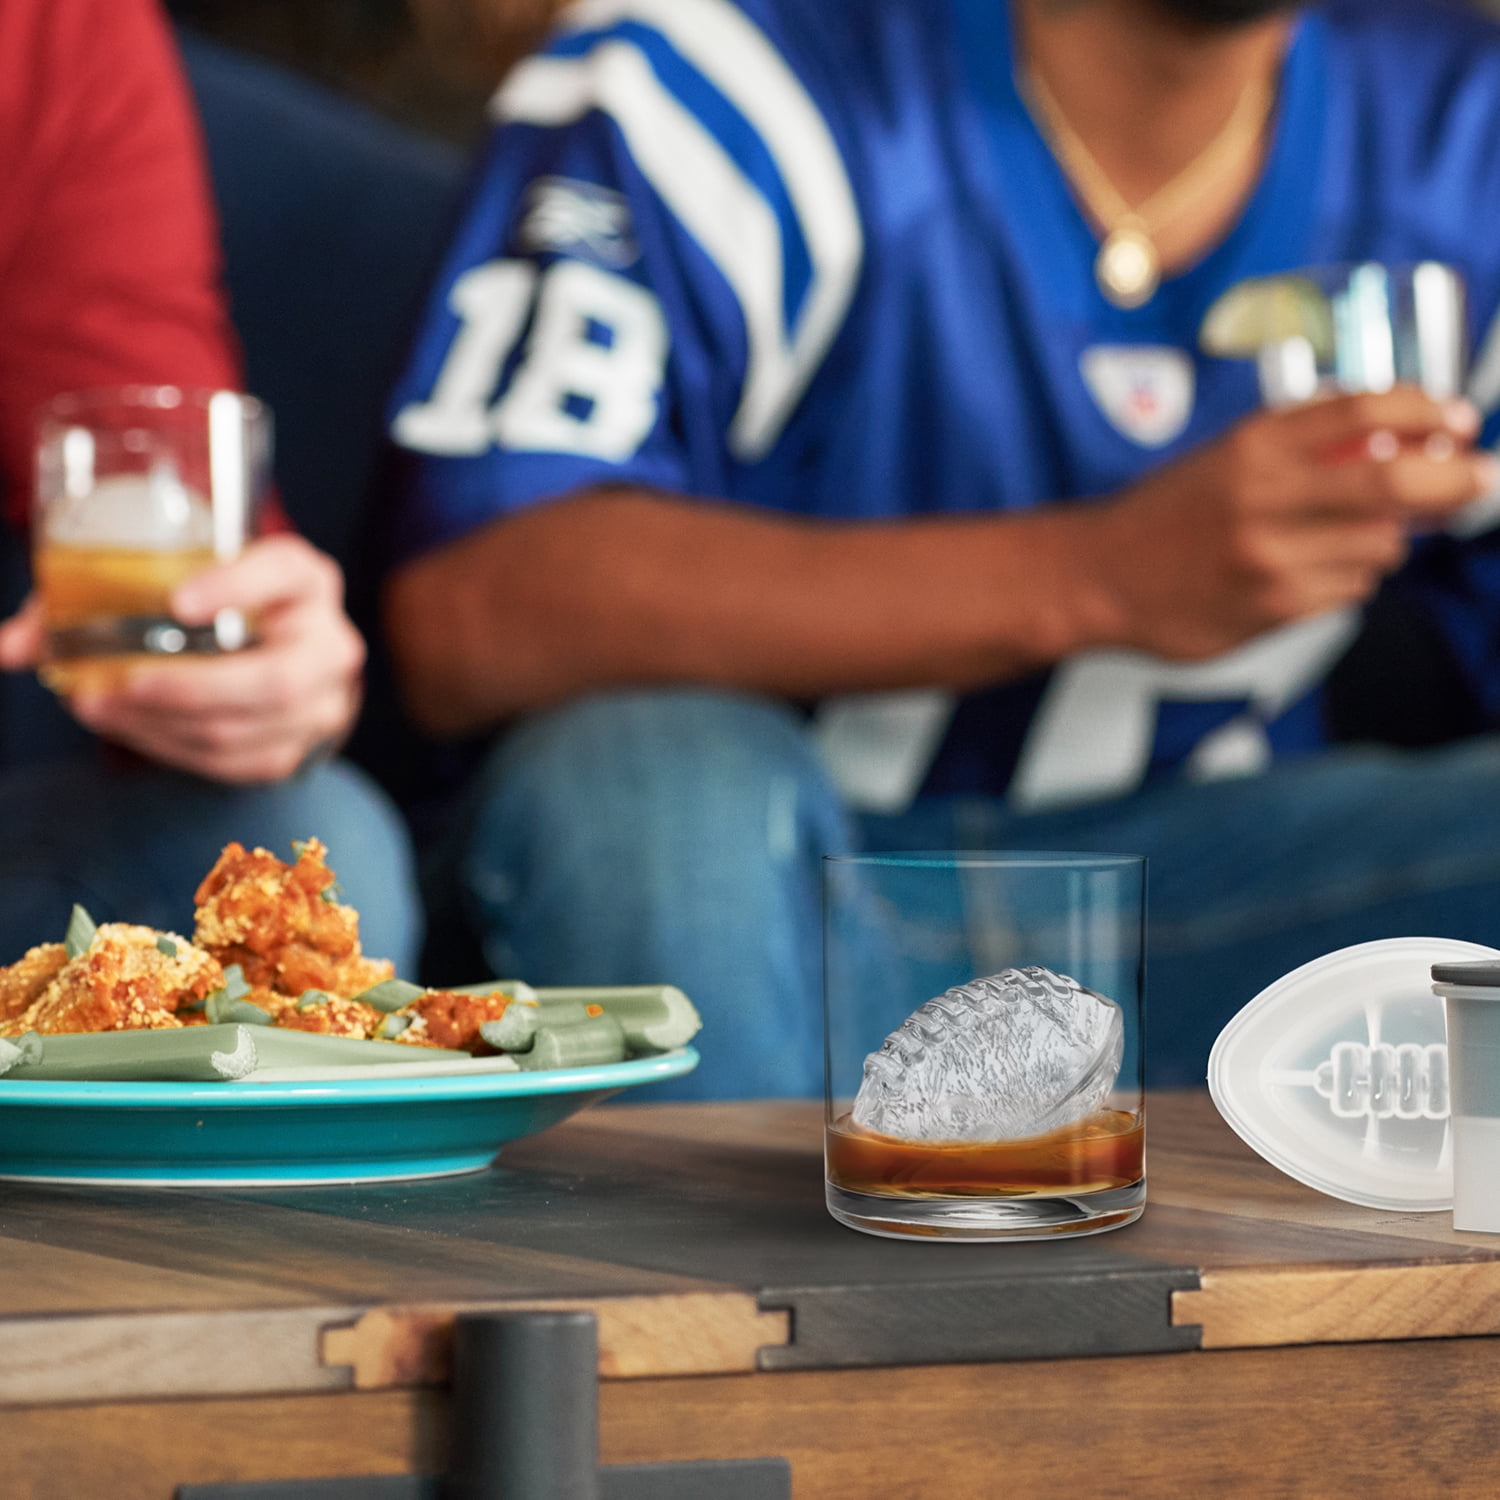 Football Silicone Ice Mold - HR092 - IdeaStage Promotional Products